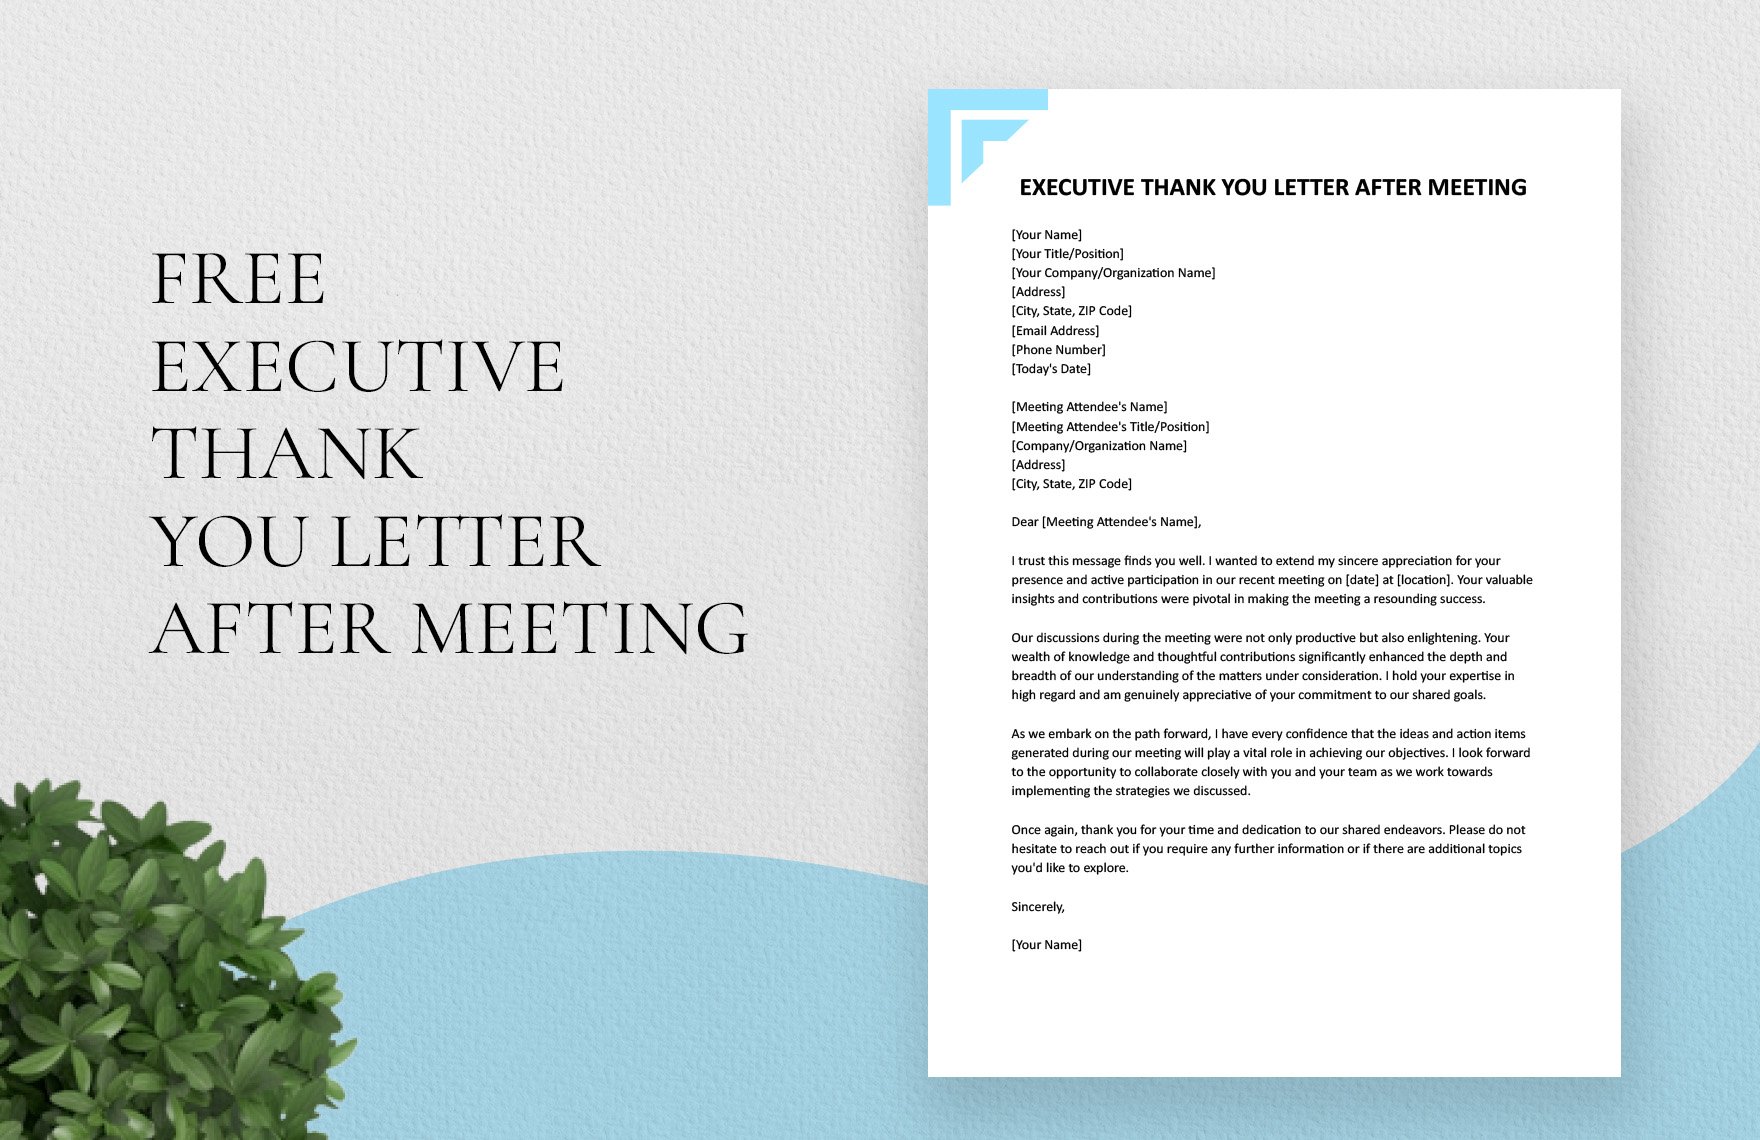 Free Executive Thank You Letter After Meeting